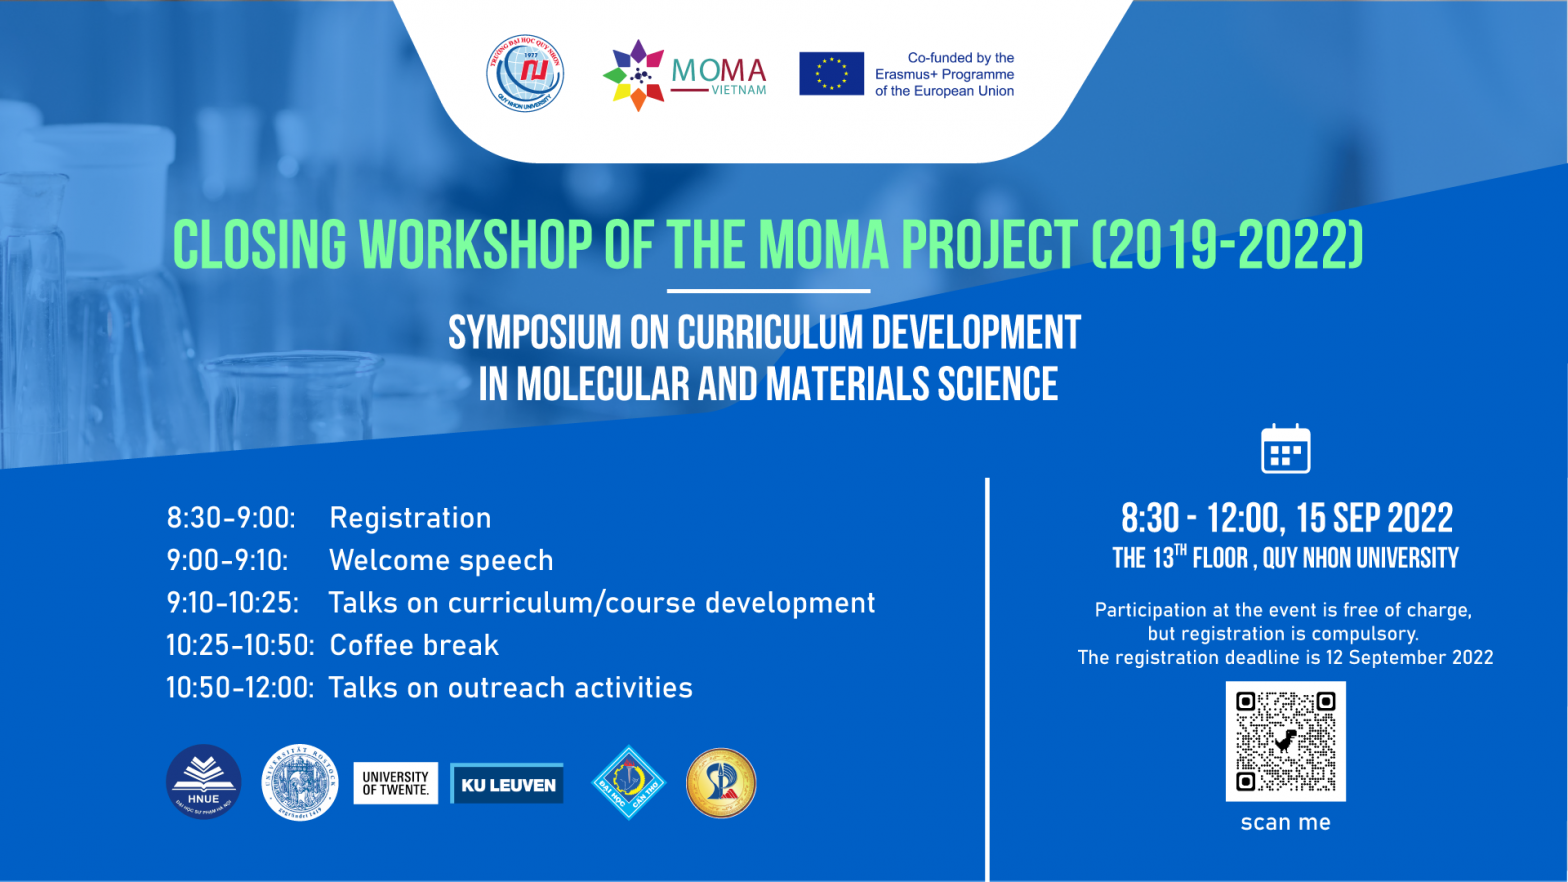 A symposium on curriculum development in molecular and materials science – Closing workshop of the MOMA project